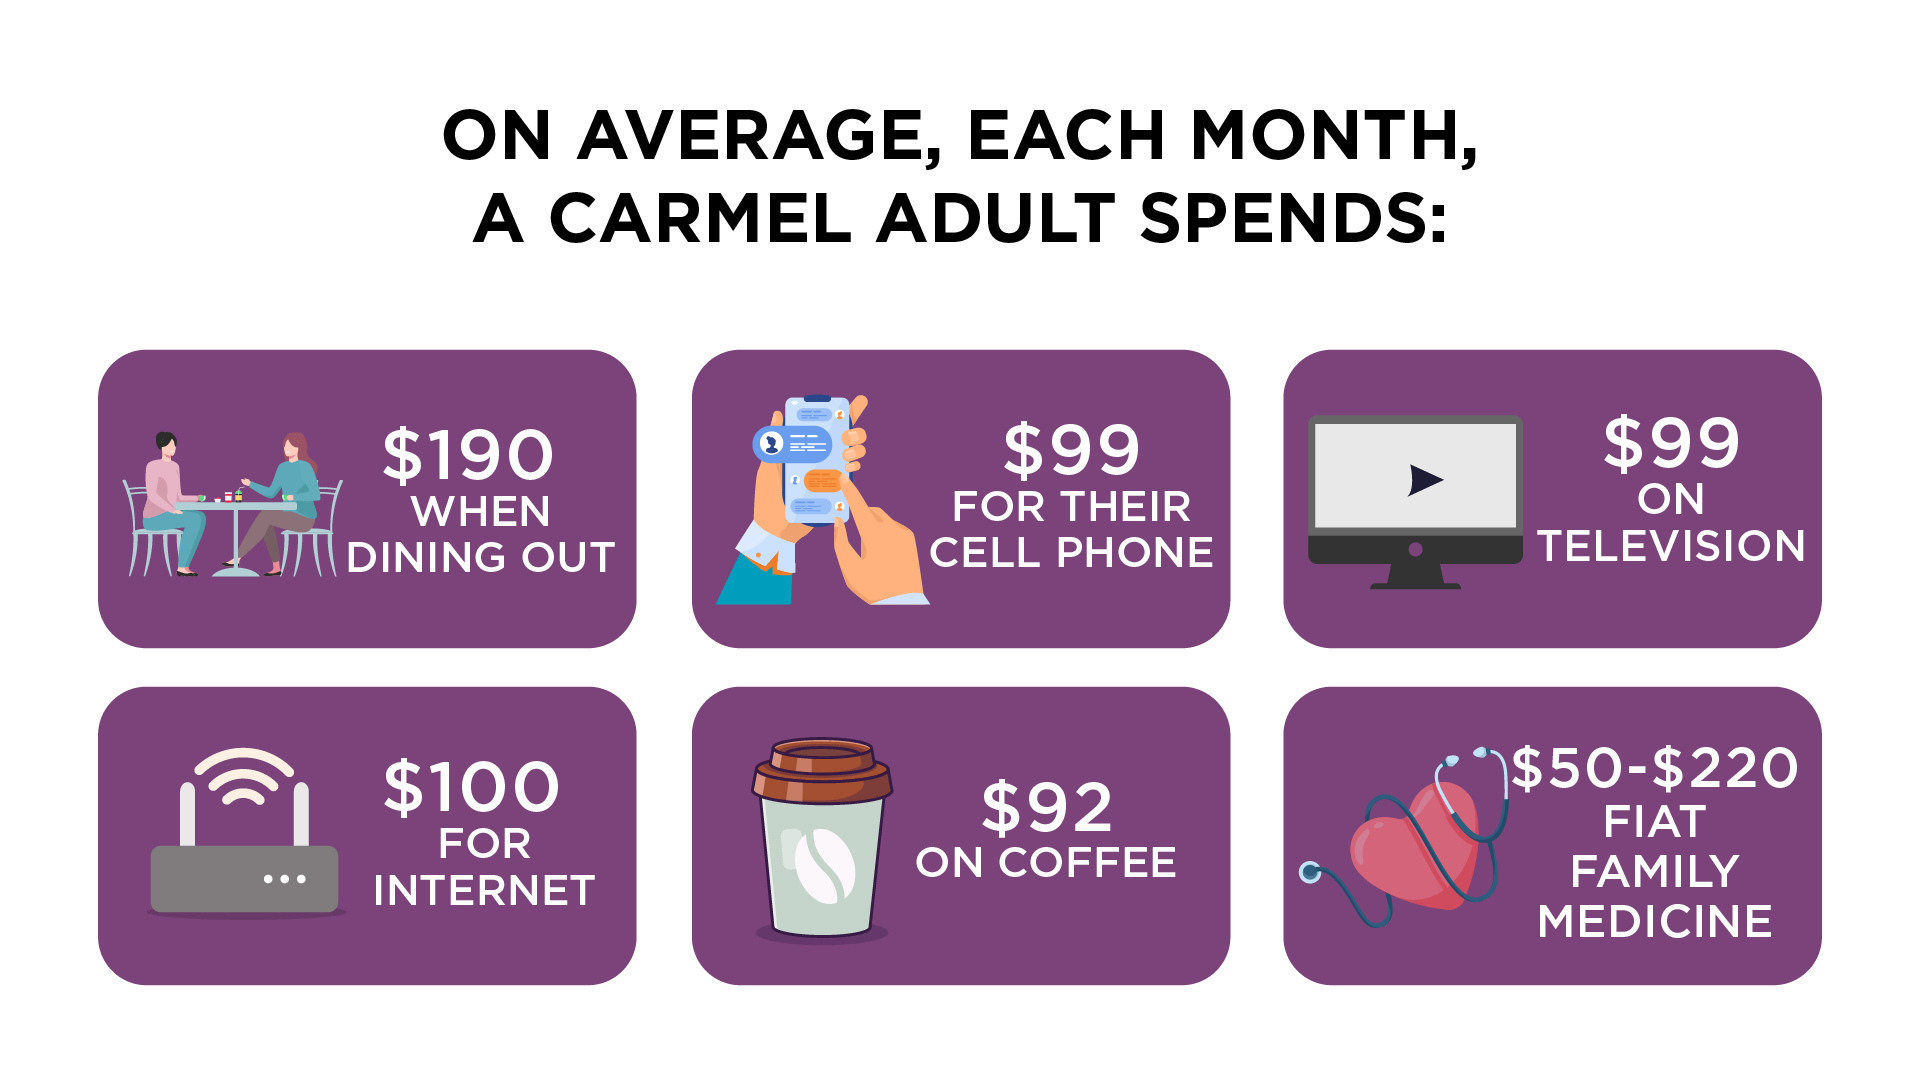 ON AVERAGE, EACH MONTH, A CARMEL ADULT SPENDS: